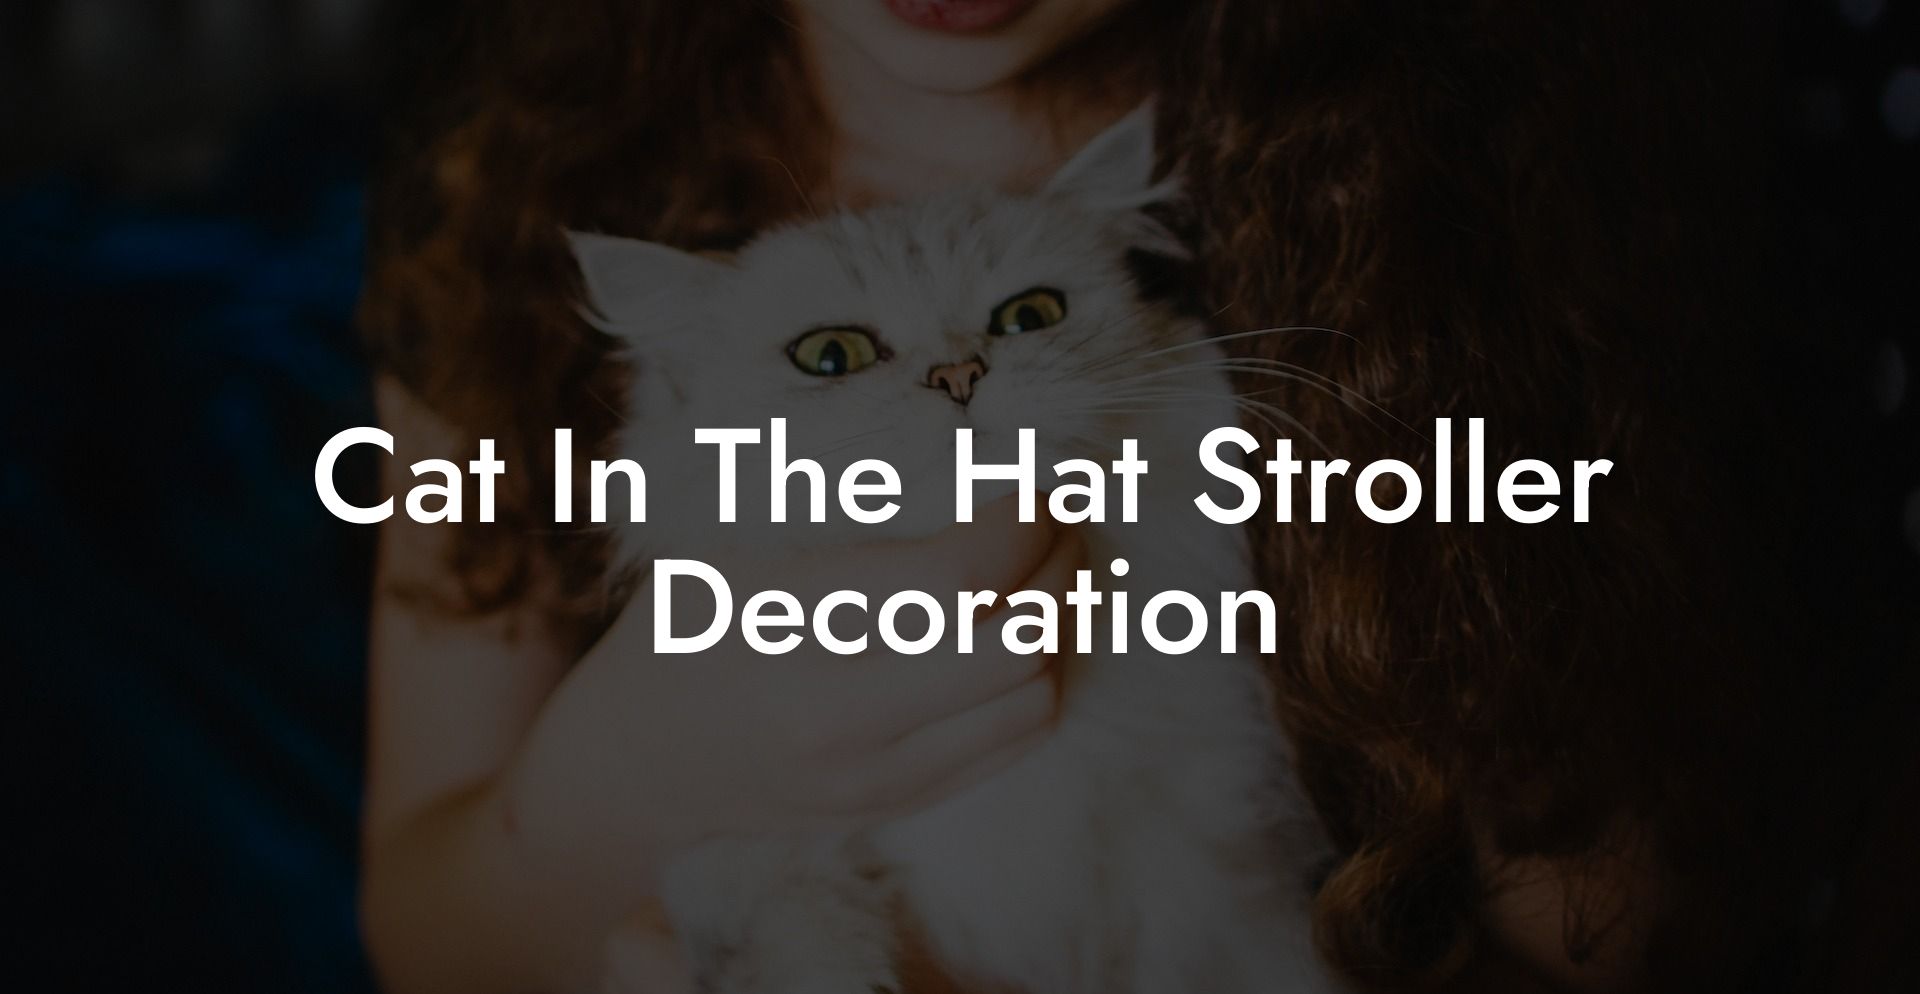 Cat In The Hat Stroller Decoration